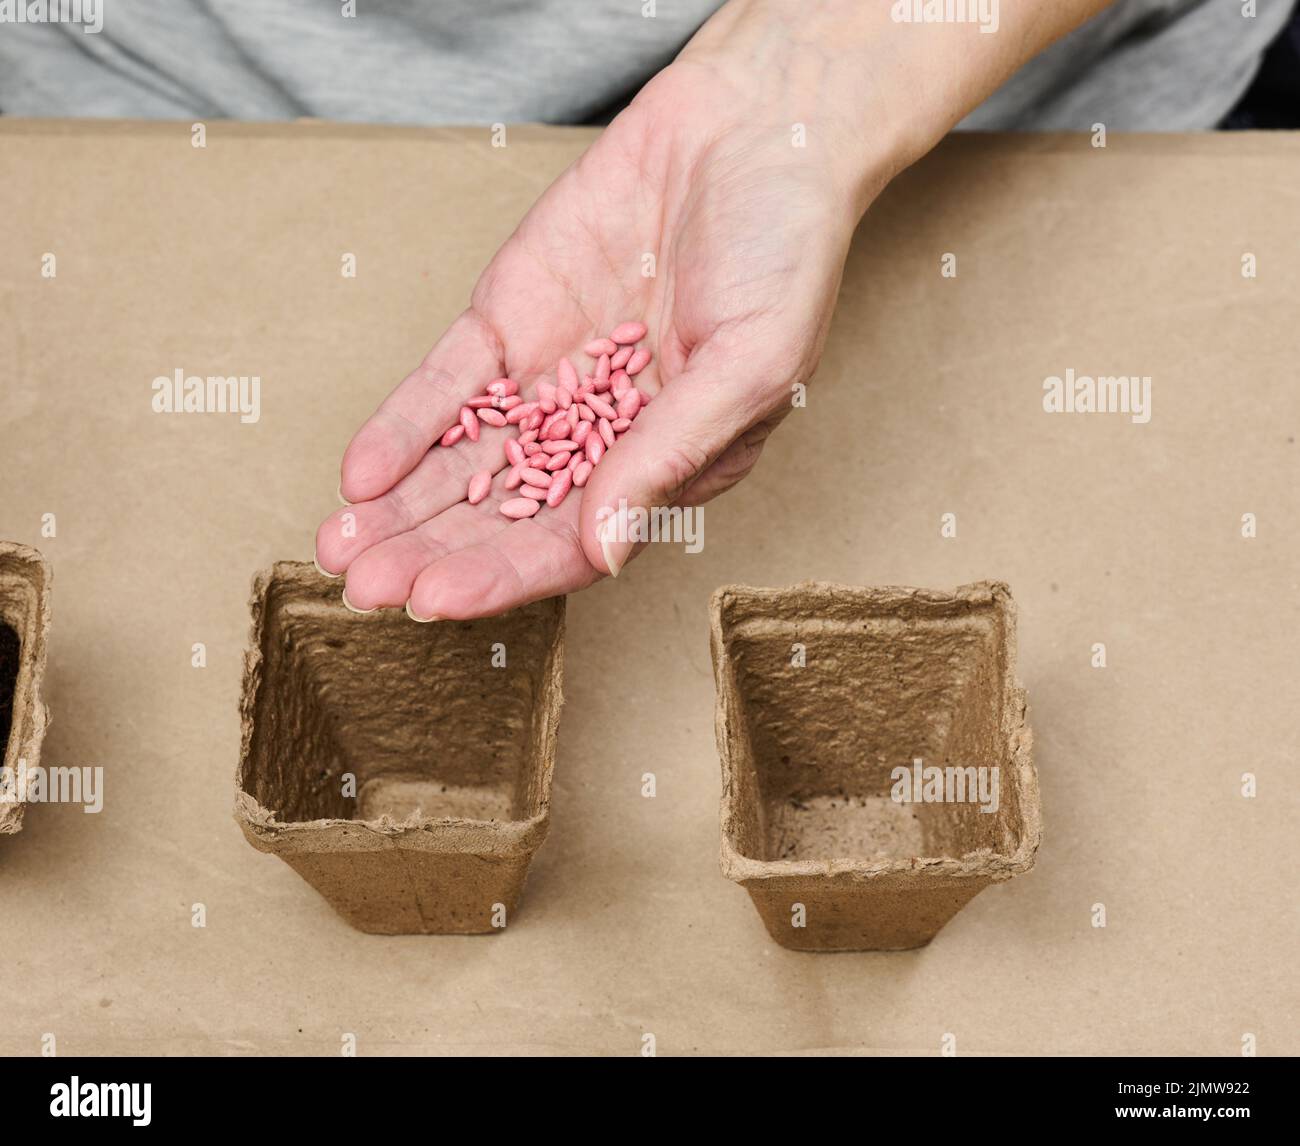 Cucumber seeds in a female palm. Planting seeds in paper cardboard cup at home, hobby Stock Photo